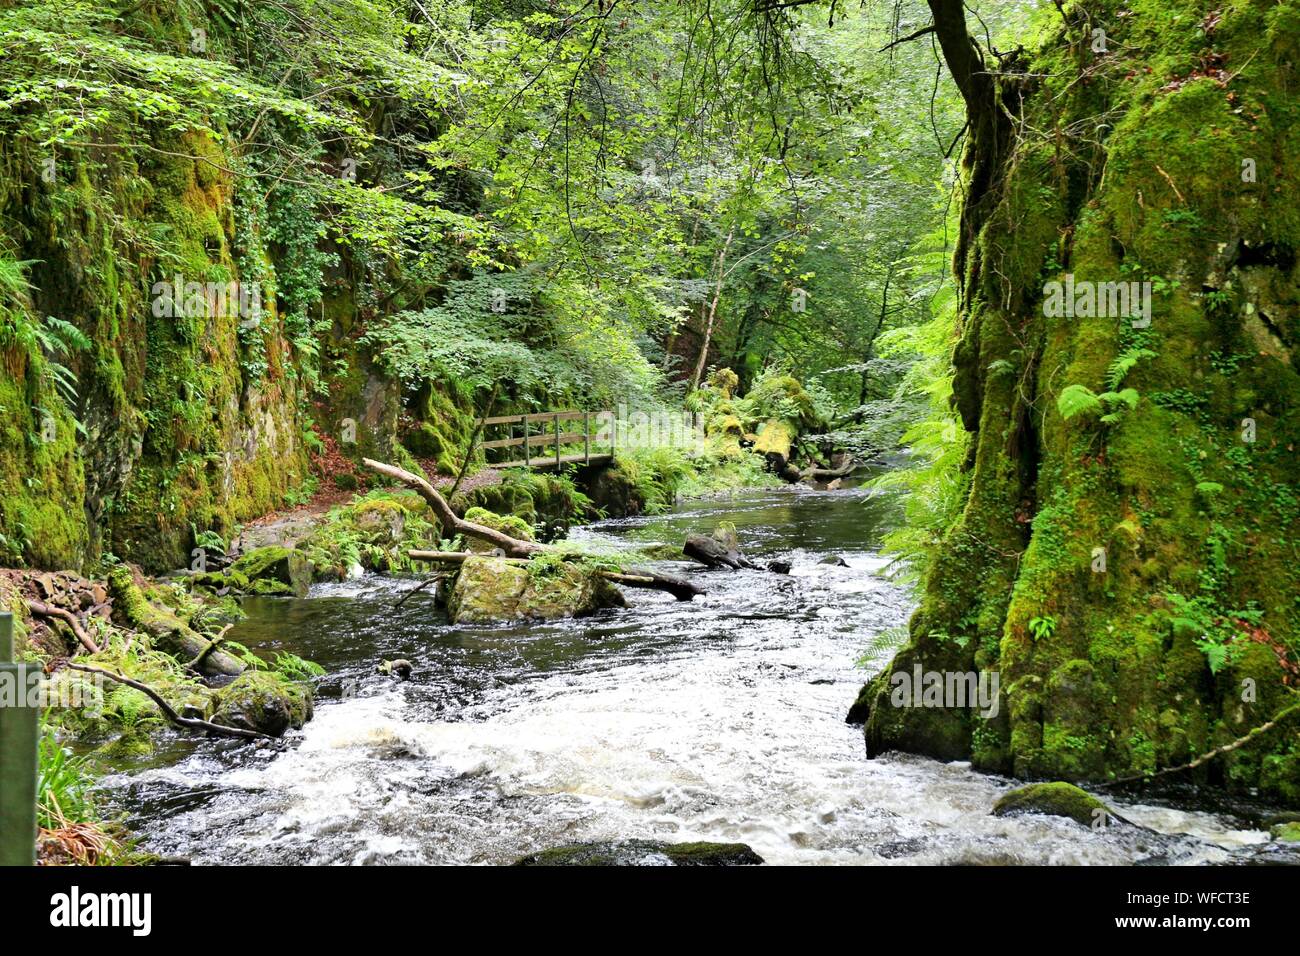 Scenic View Of River Doon In Galloway Forest Park Stock Photo